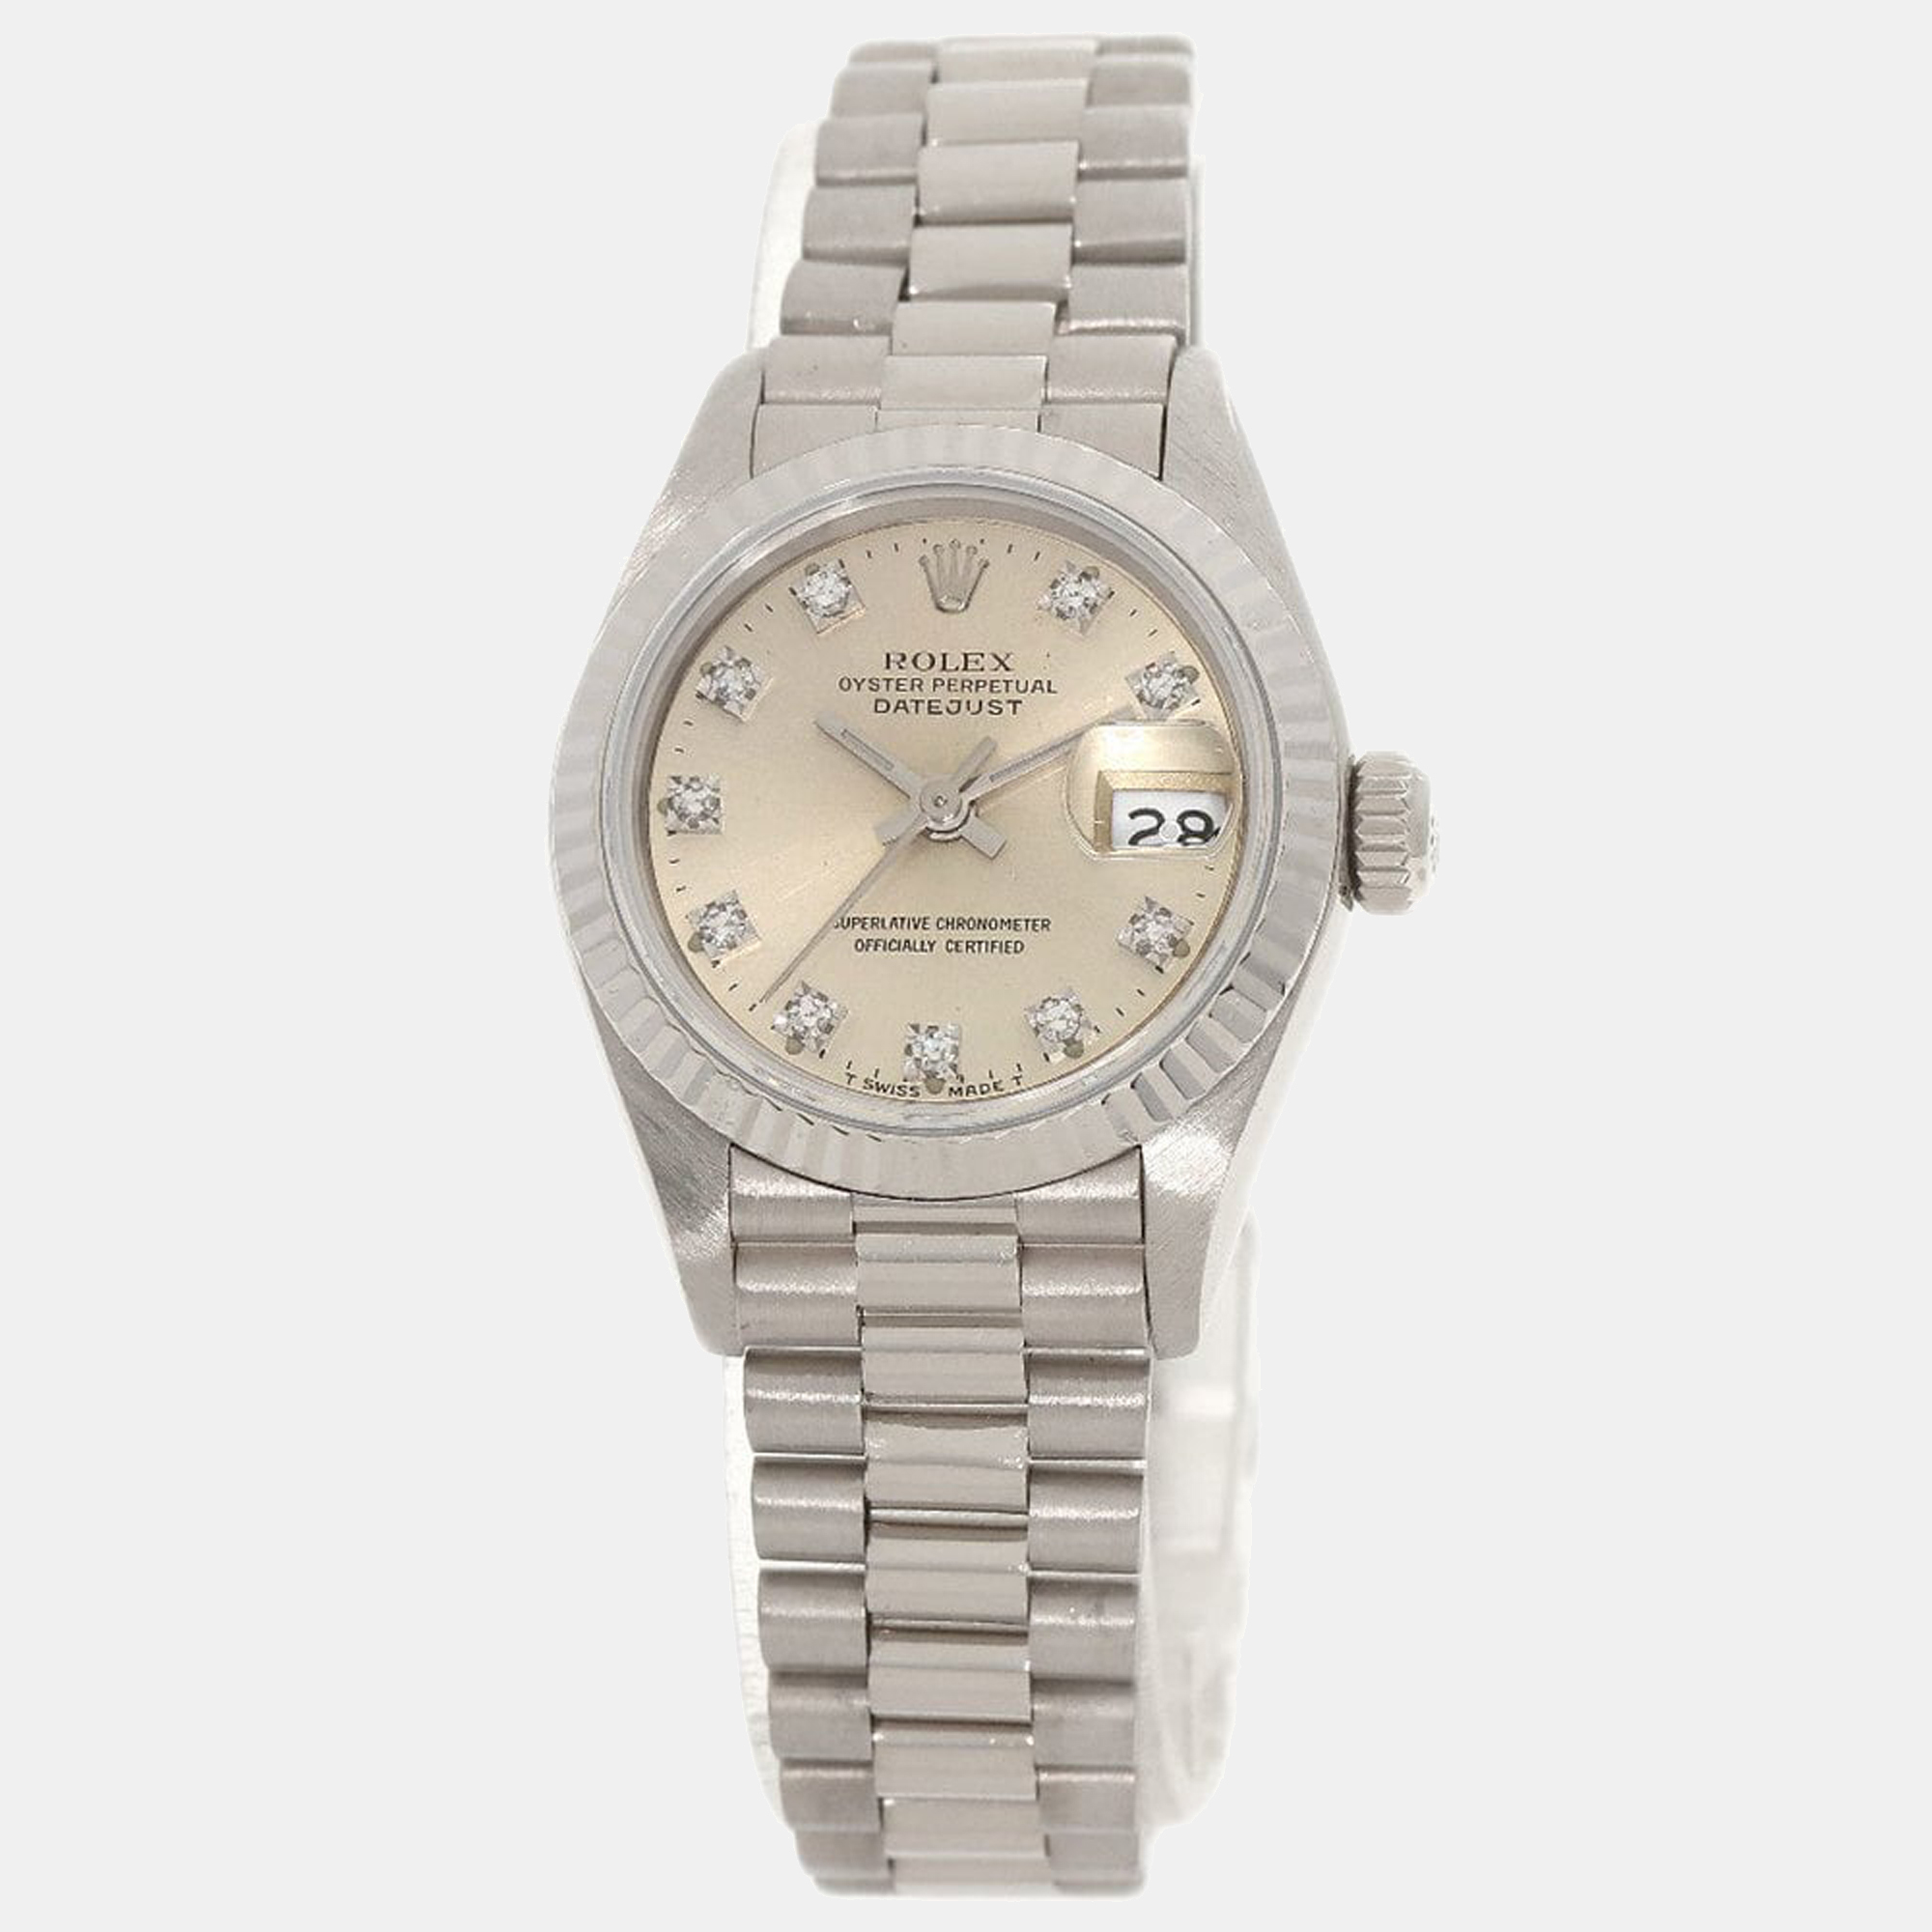 Rolex silver diamonds 18k white gold and stainless steel datejust 69179g women's wristwatch 26 mm